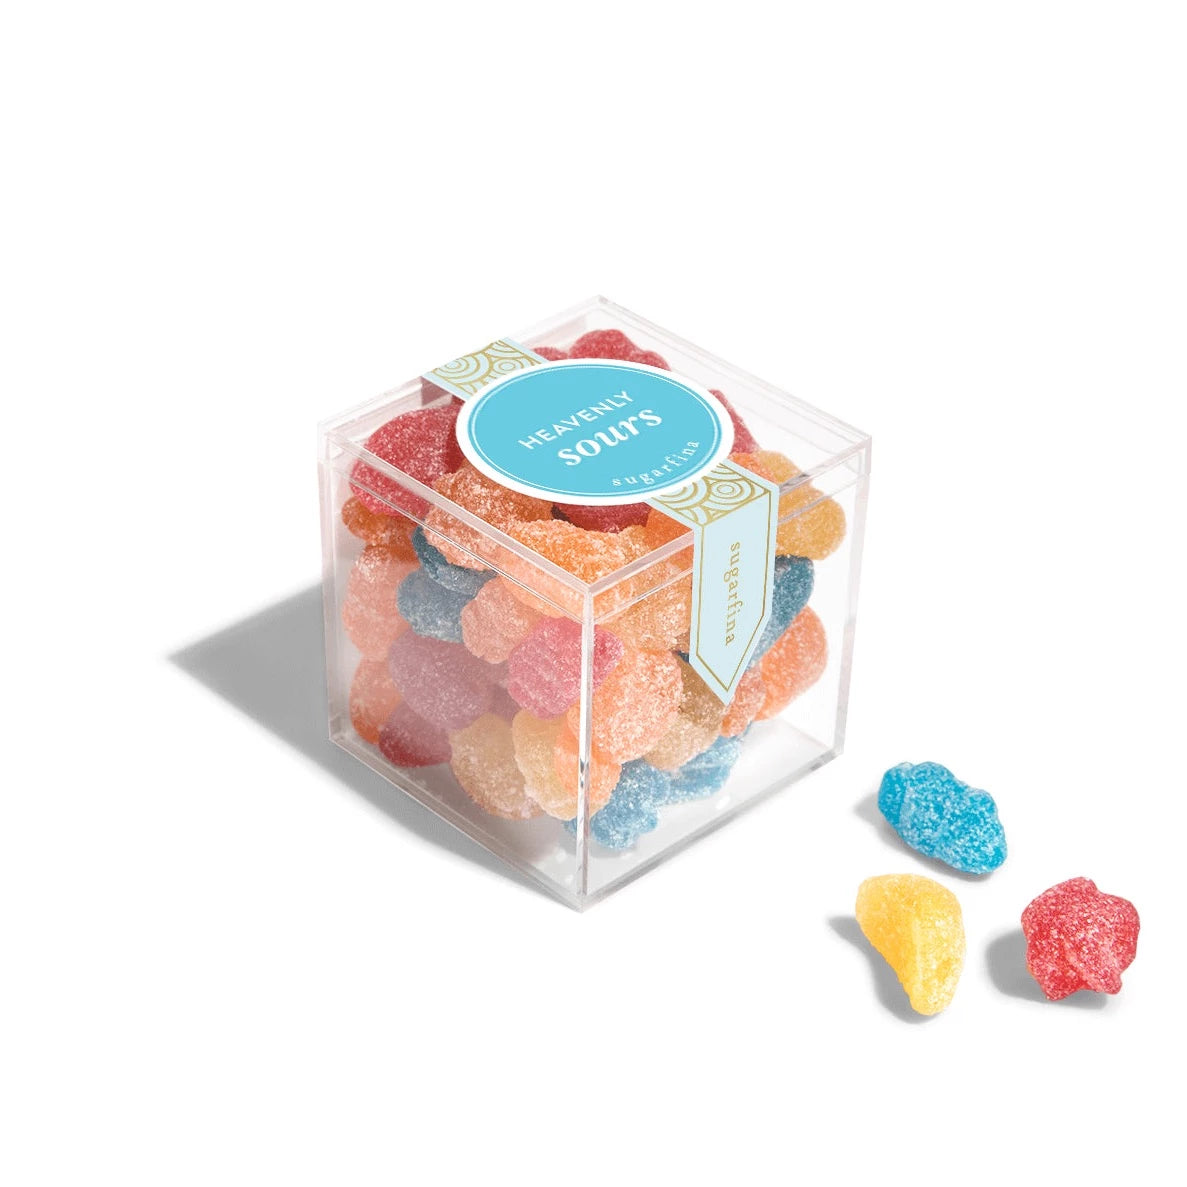 clear acrylic cube containing the colorful star and moon shaped candy